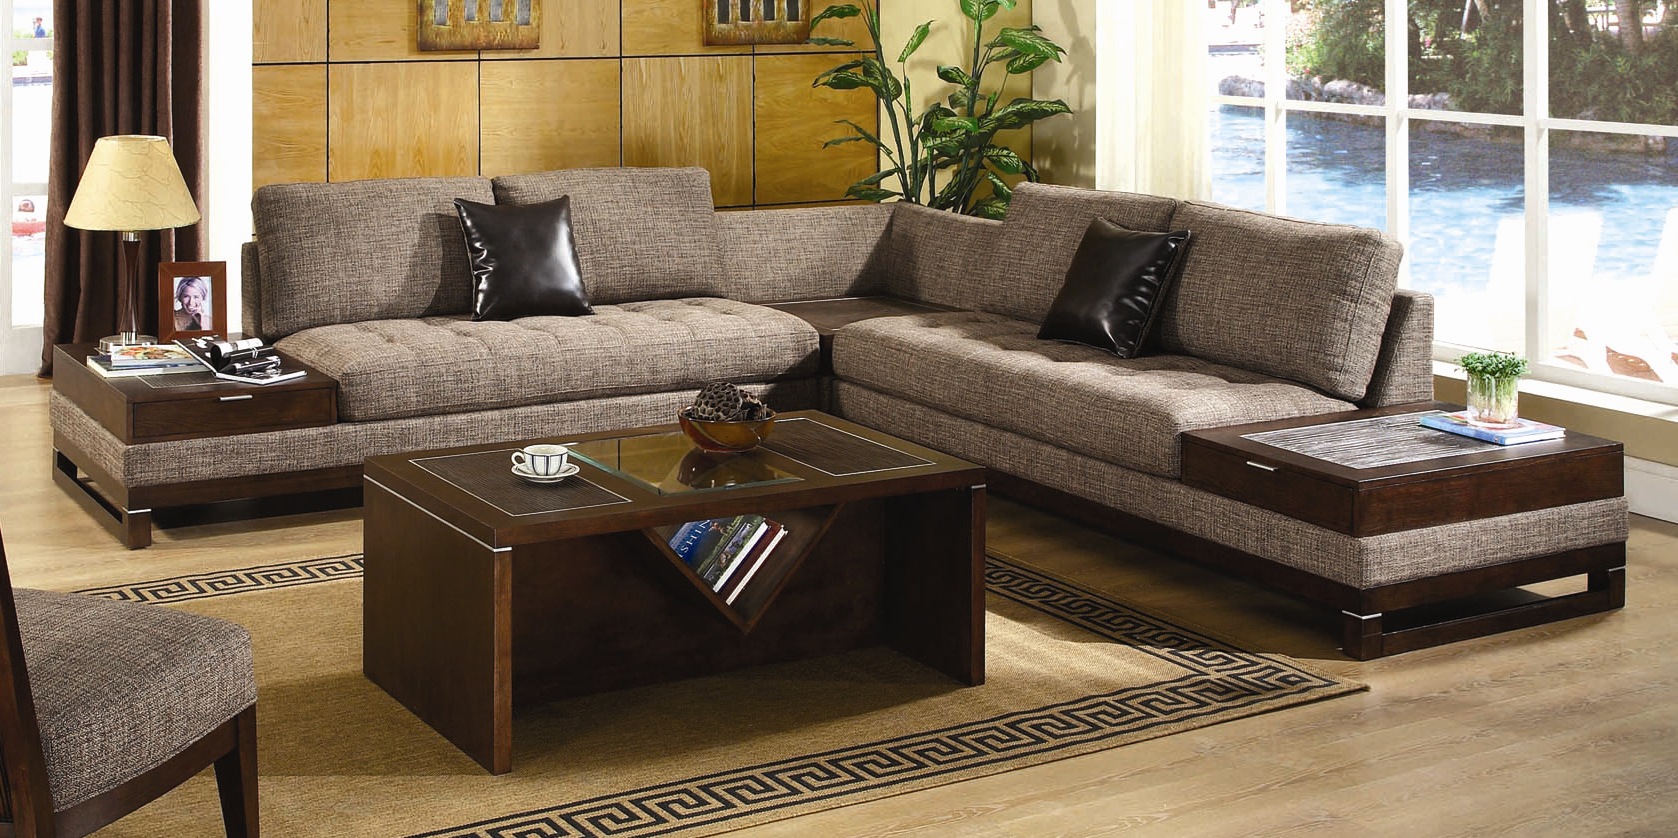 Choosing from Living Room Furniture Sets a Special Edition 